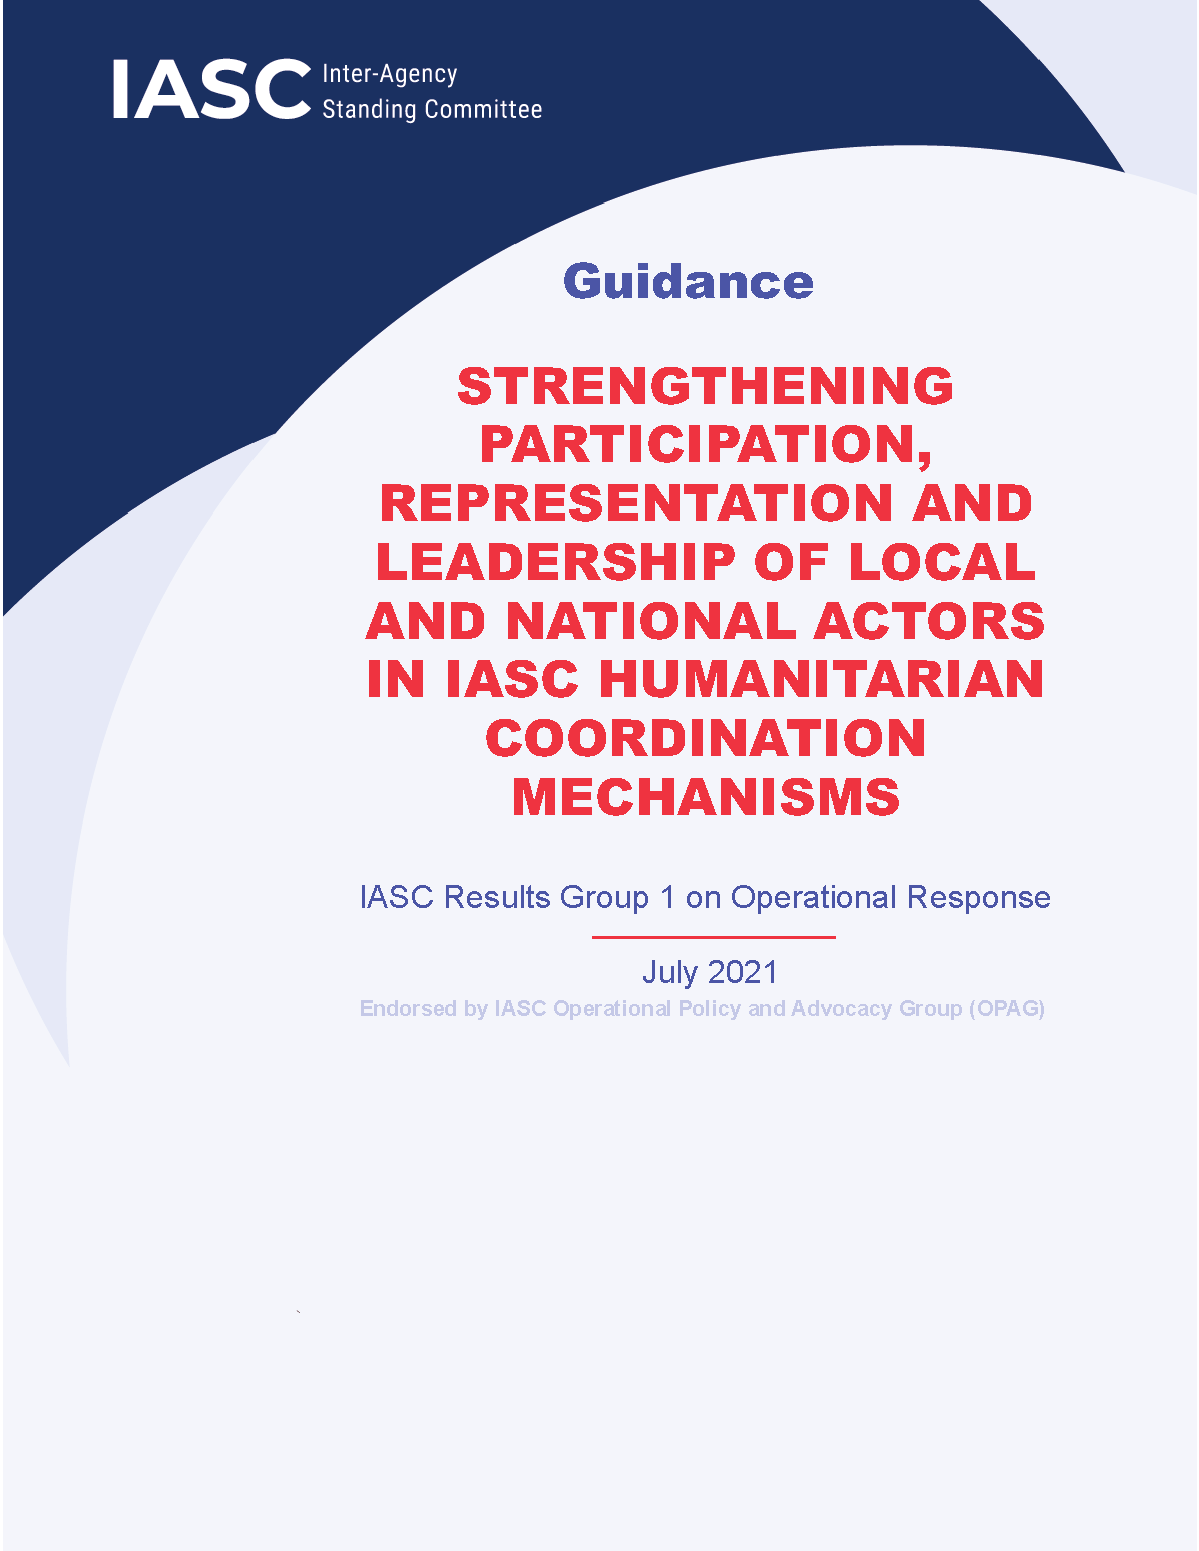 Cover page for Strengthening Participation, Representation, and Leadership of Local and National Actors in IASC Humanitarian Coordination Mechanisms